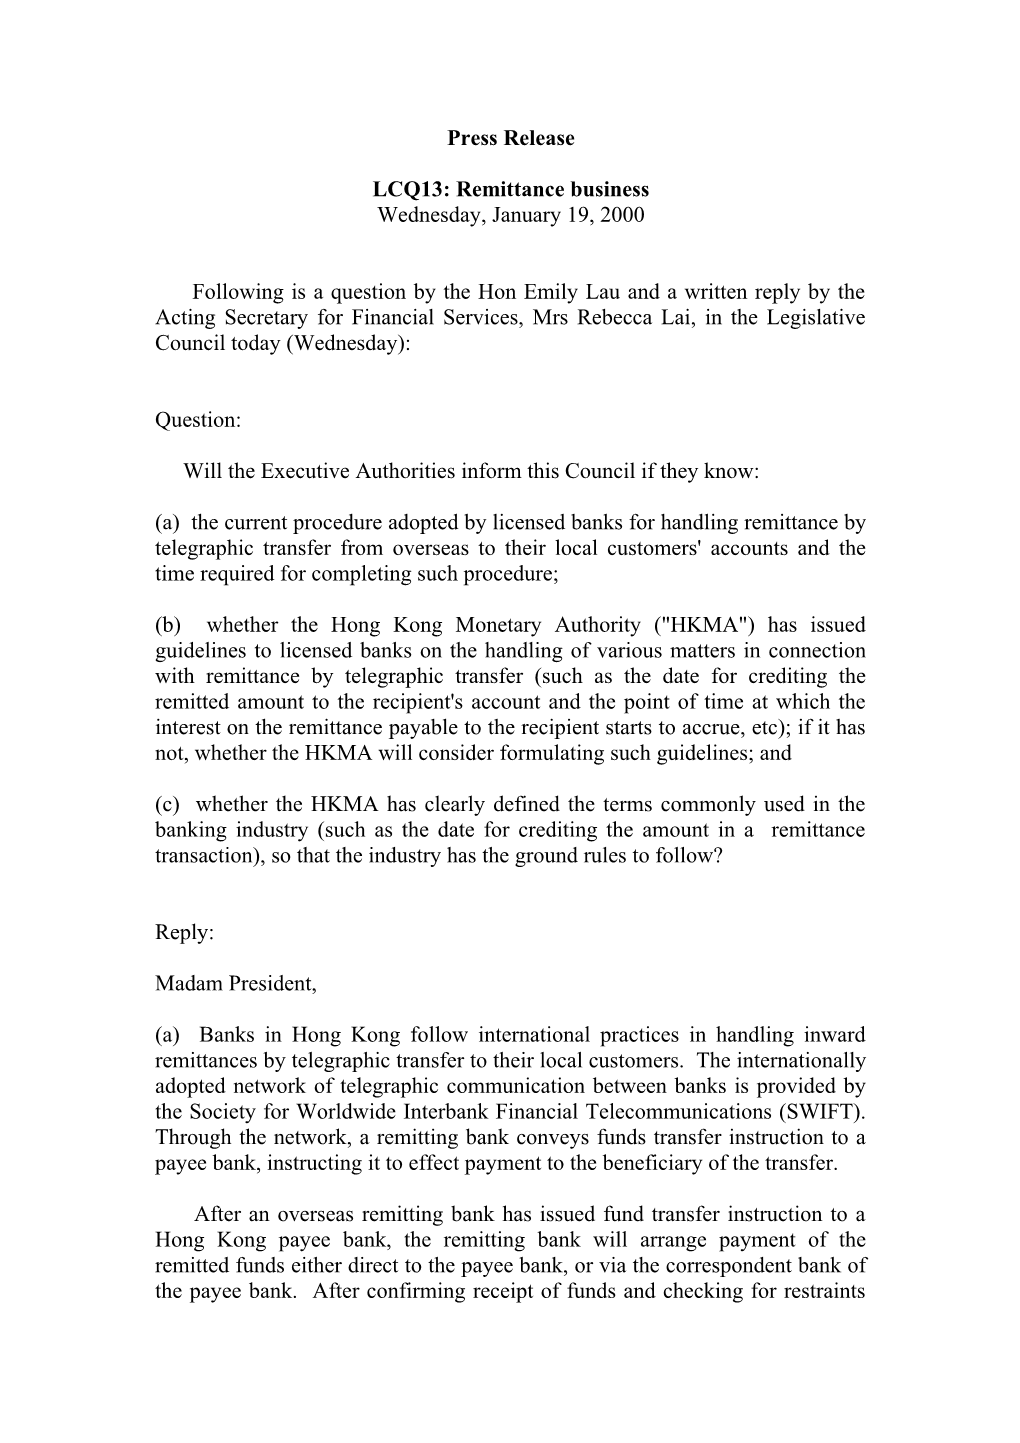 Press Release LCQ13: Remittance Business Wednesday, January 19, 2000 Following Is a Question